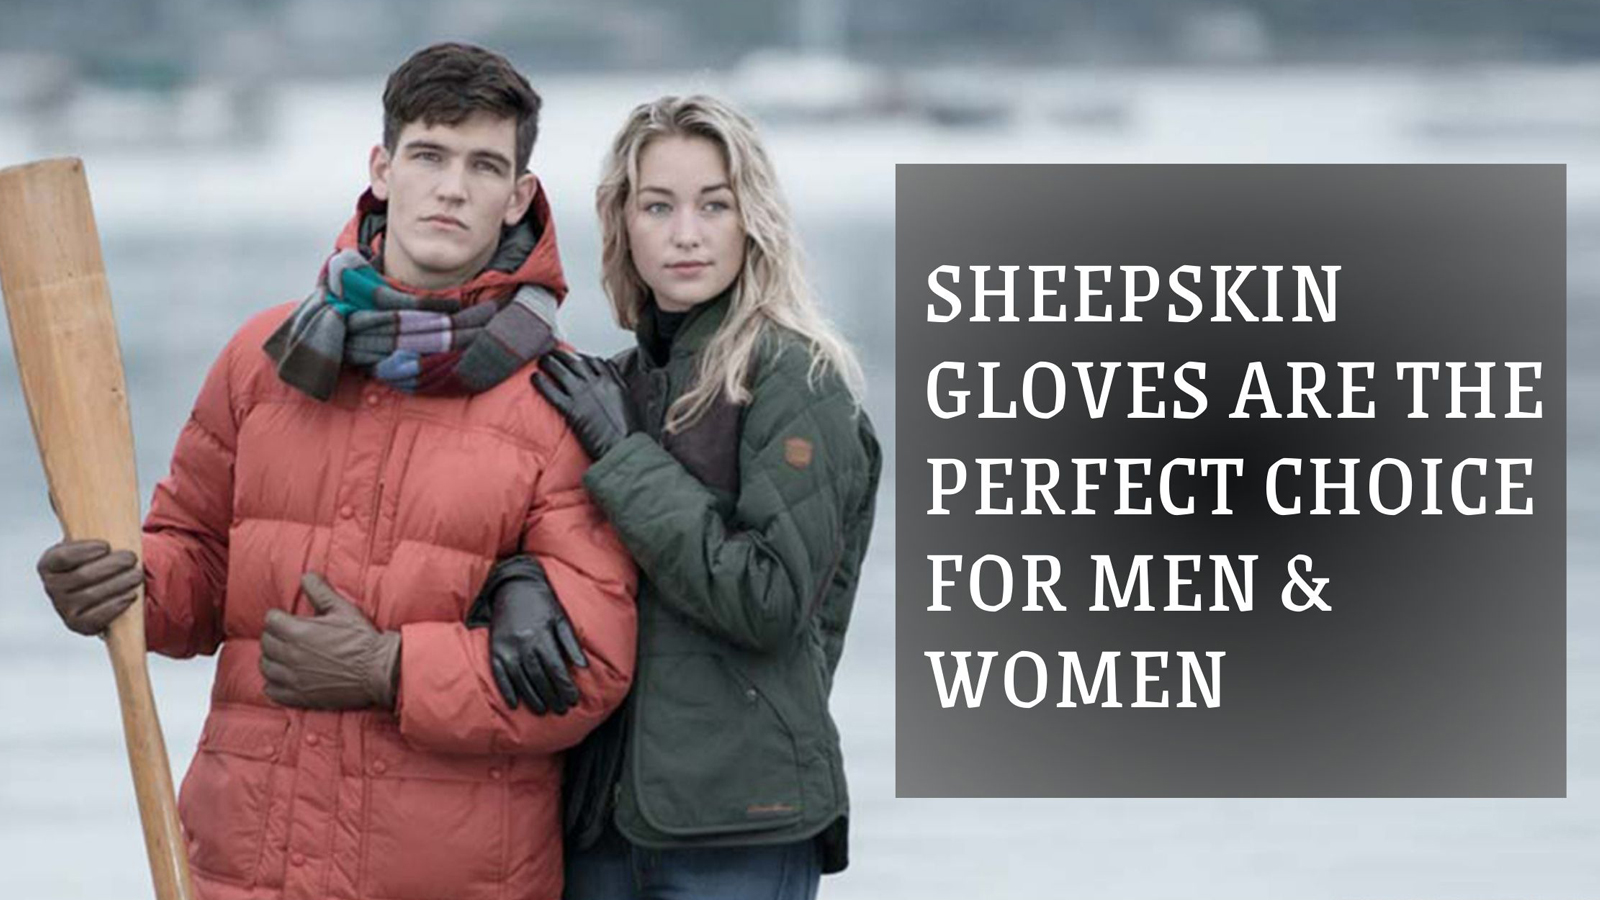 Sheepskin Gloves are the Perfect Choice for Men & Women